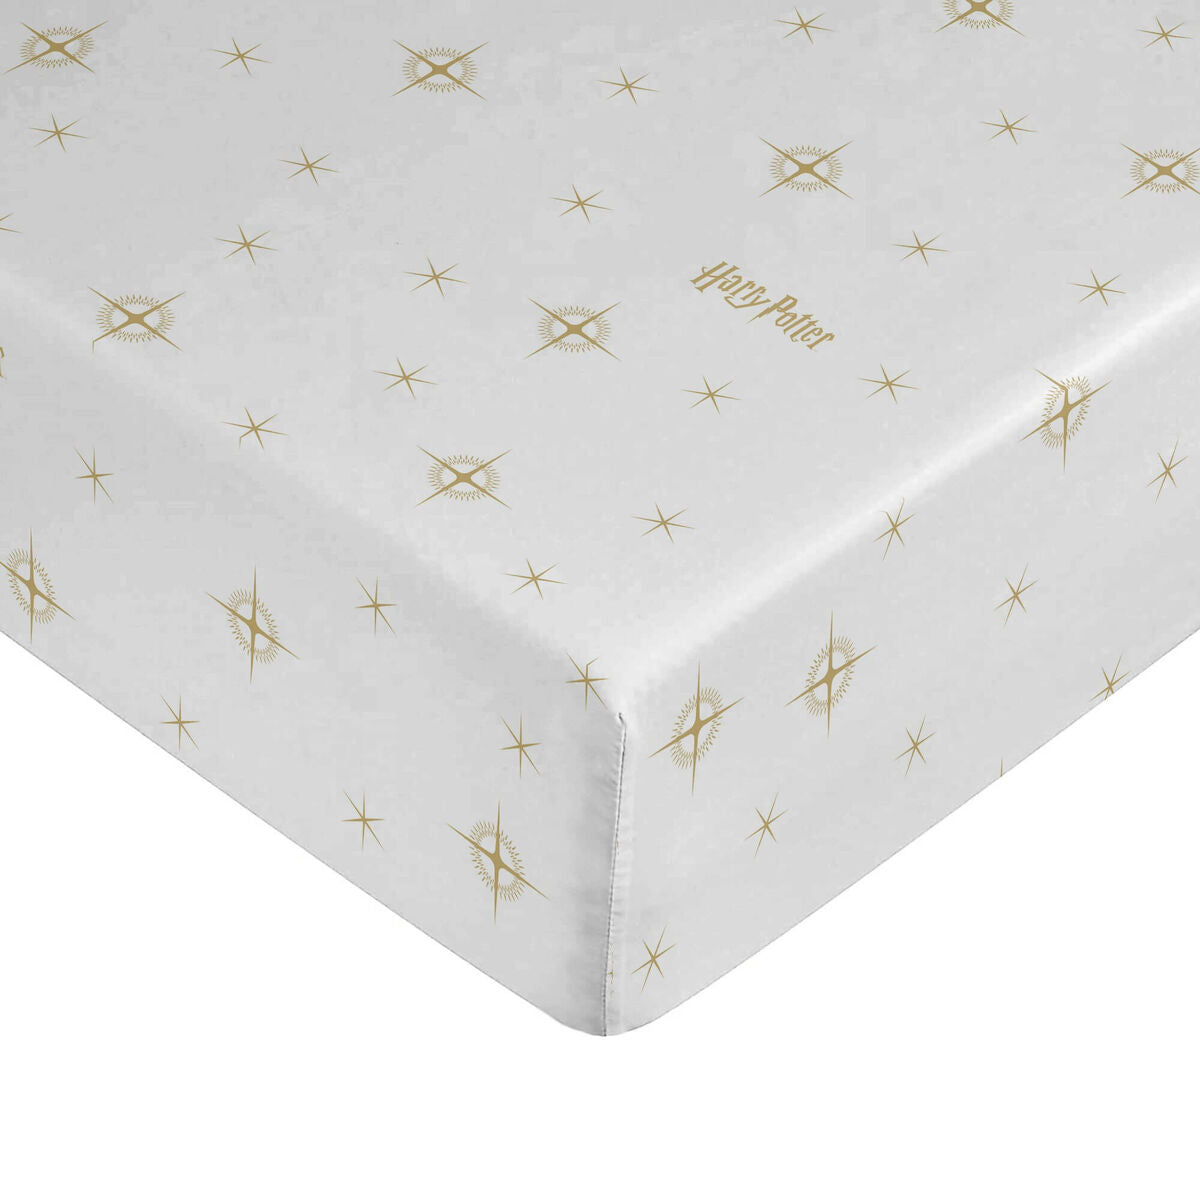 Fitted sheet Harry Potter White Golden 180 x 200 cm